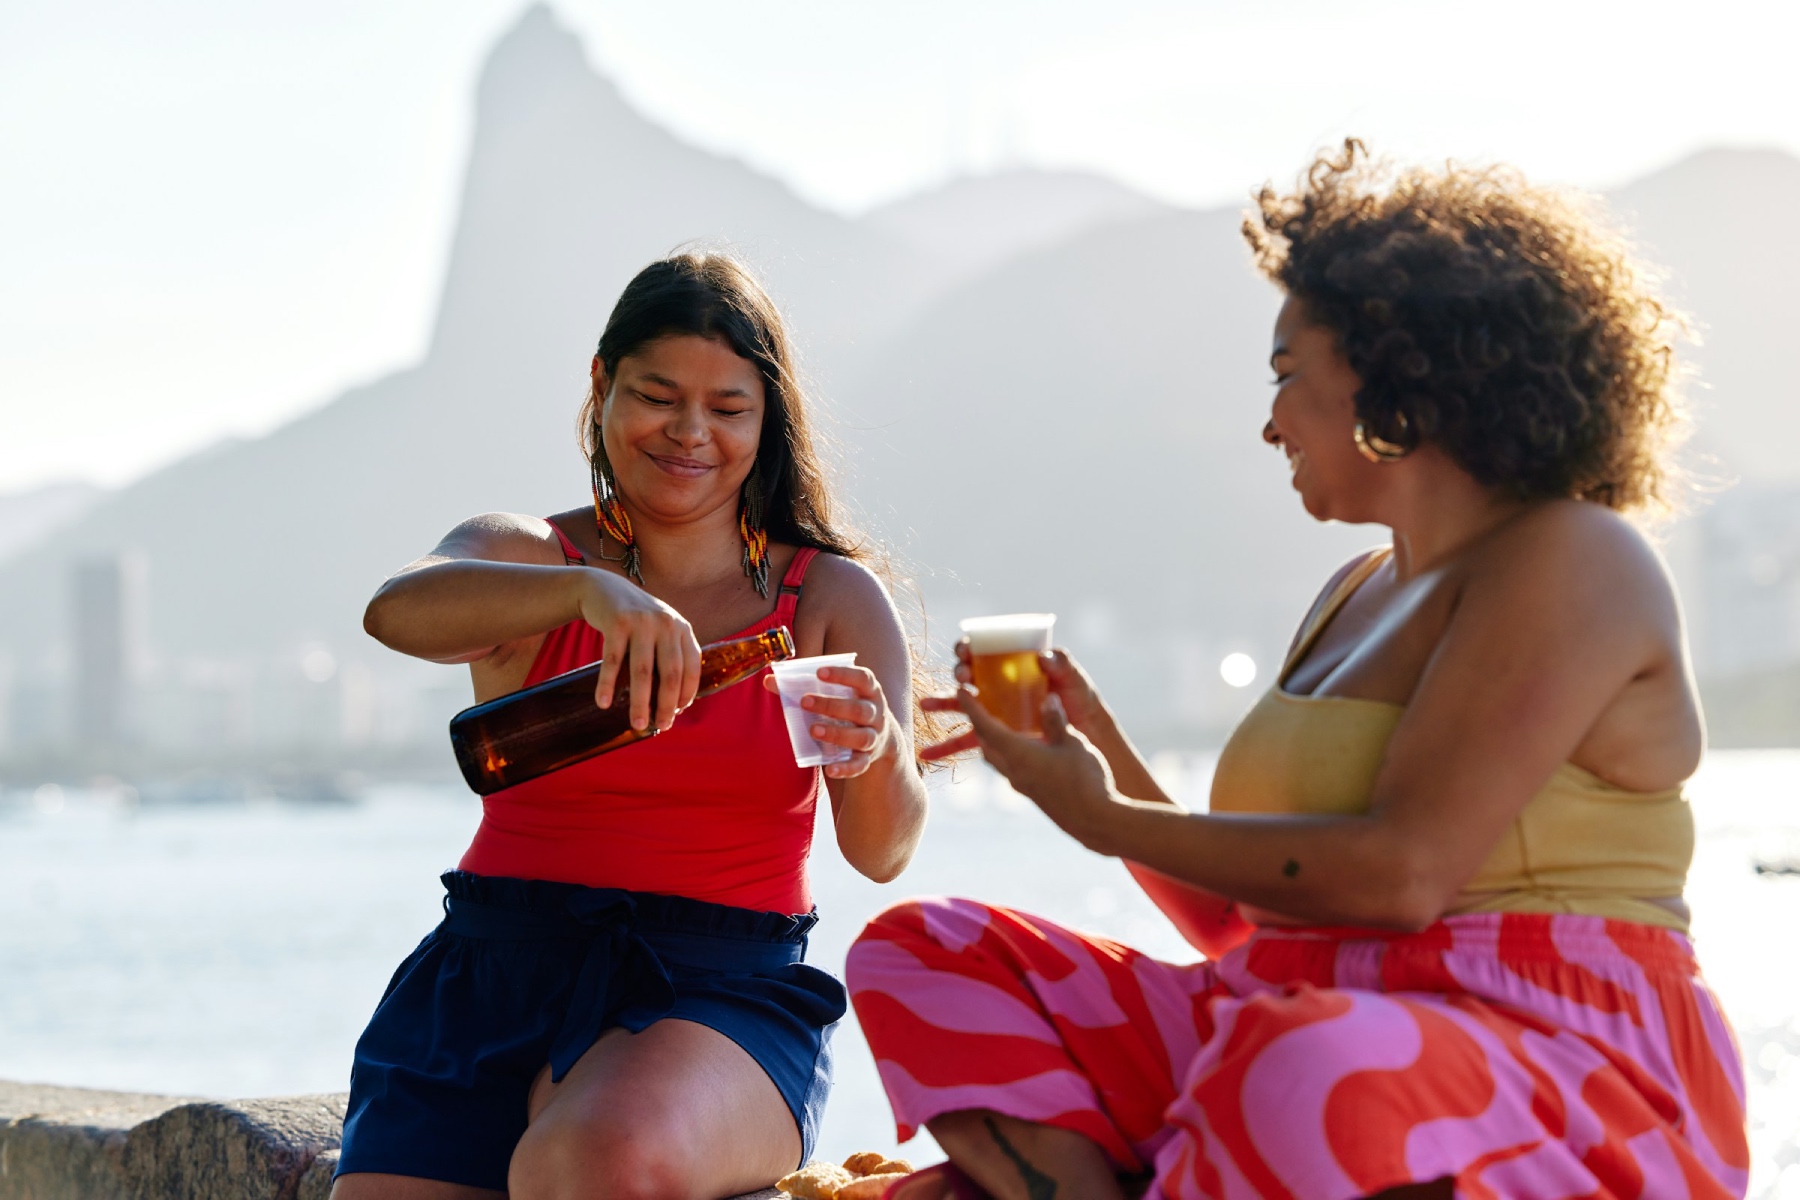 Two woman sit by the sea pouring beer into their glasses, they are relaxed and smiling